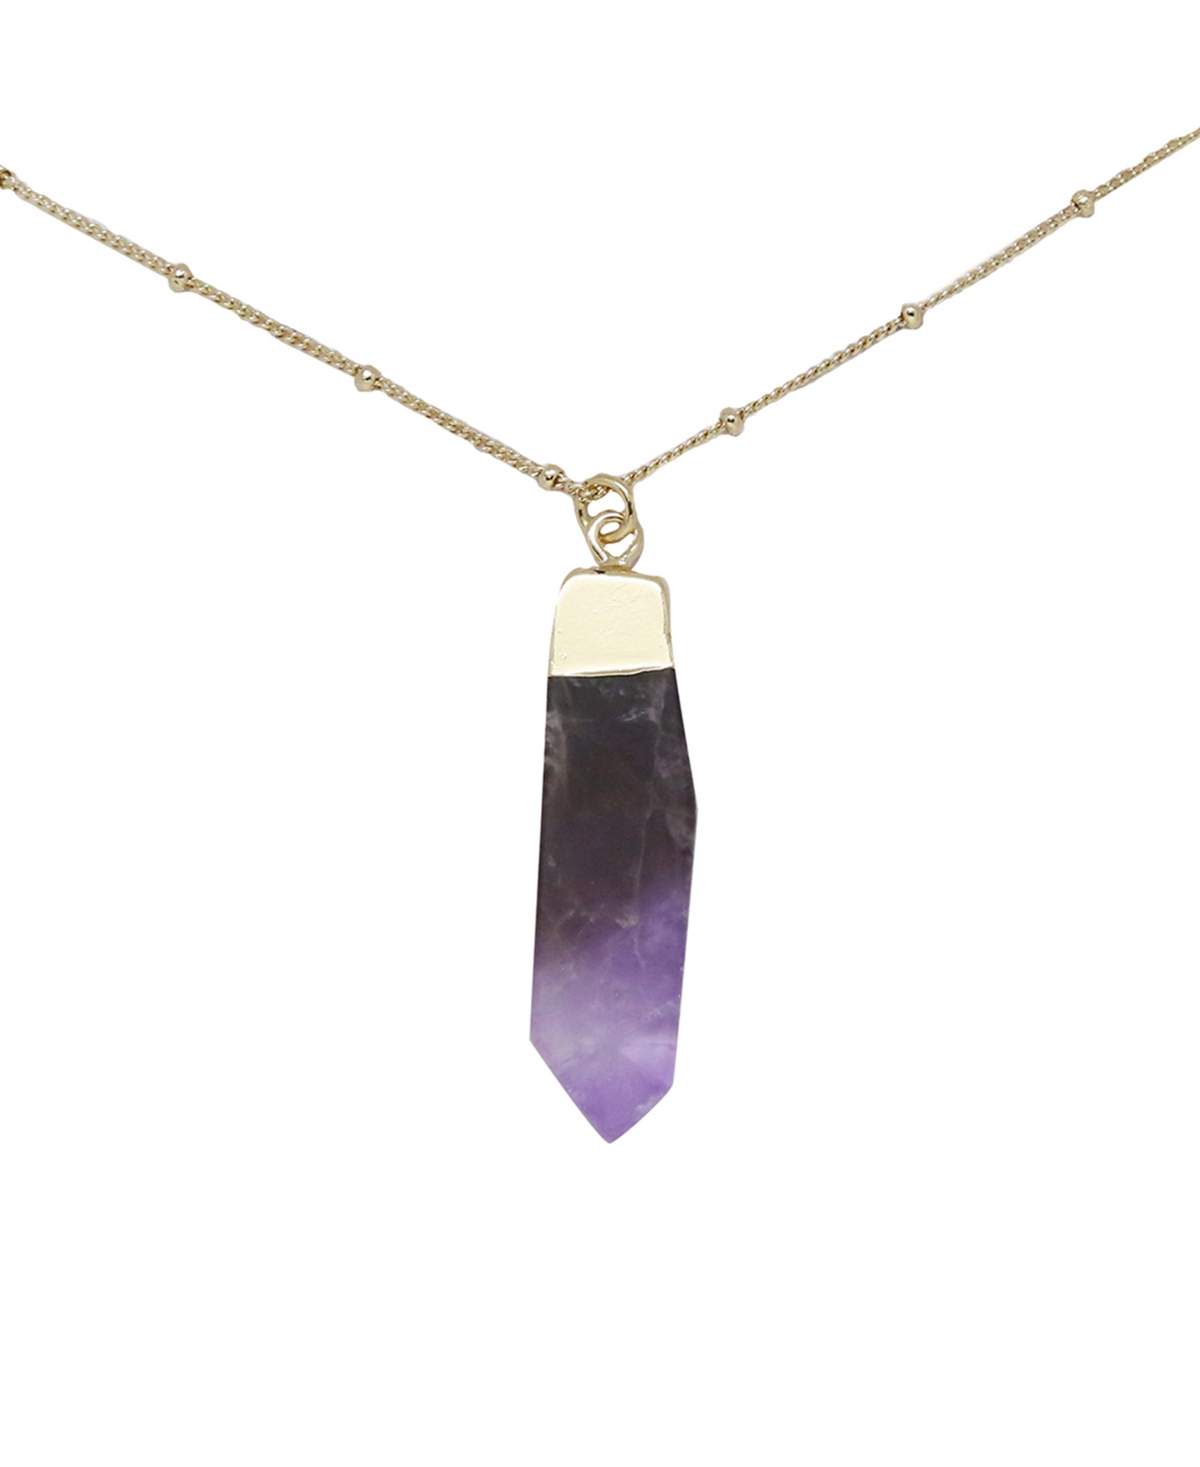 Charged Amethyst Pendant Necklace